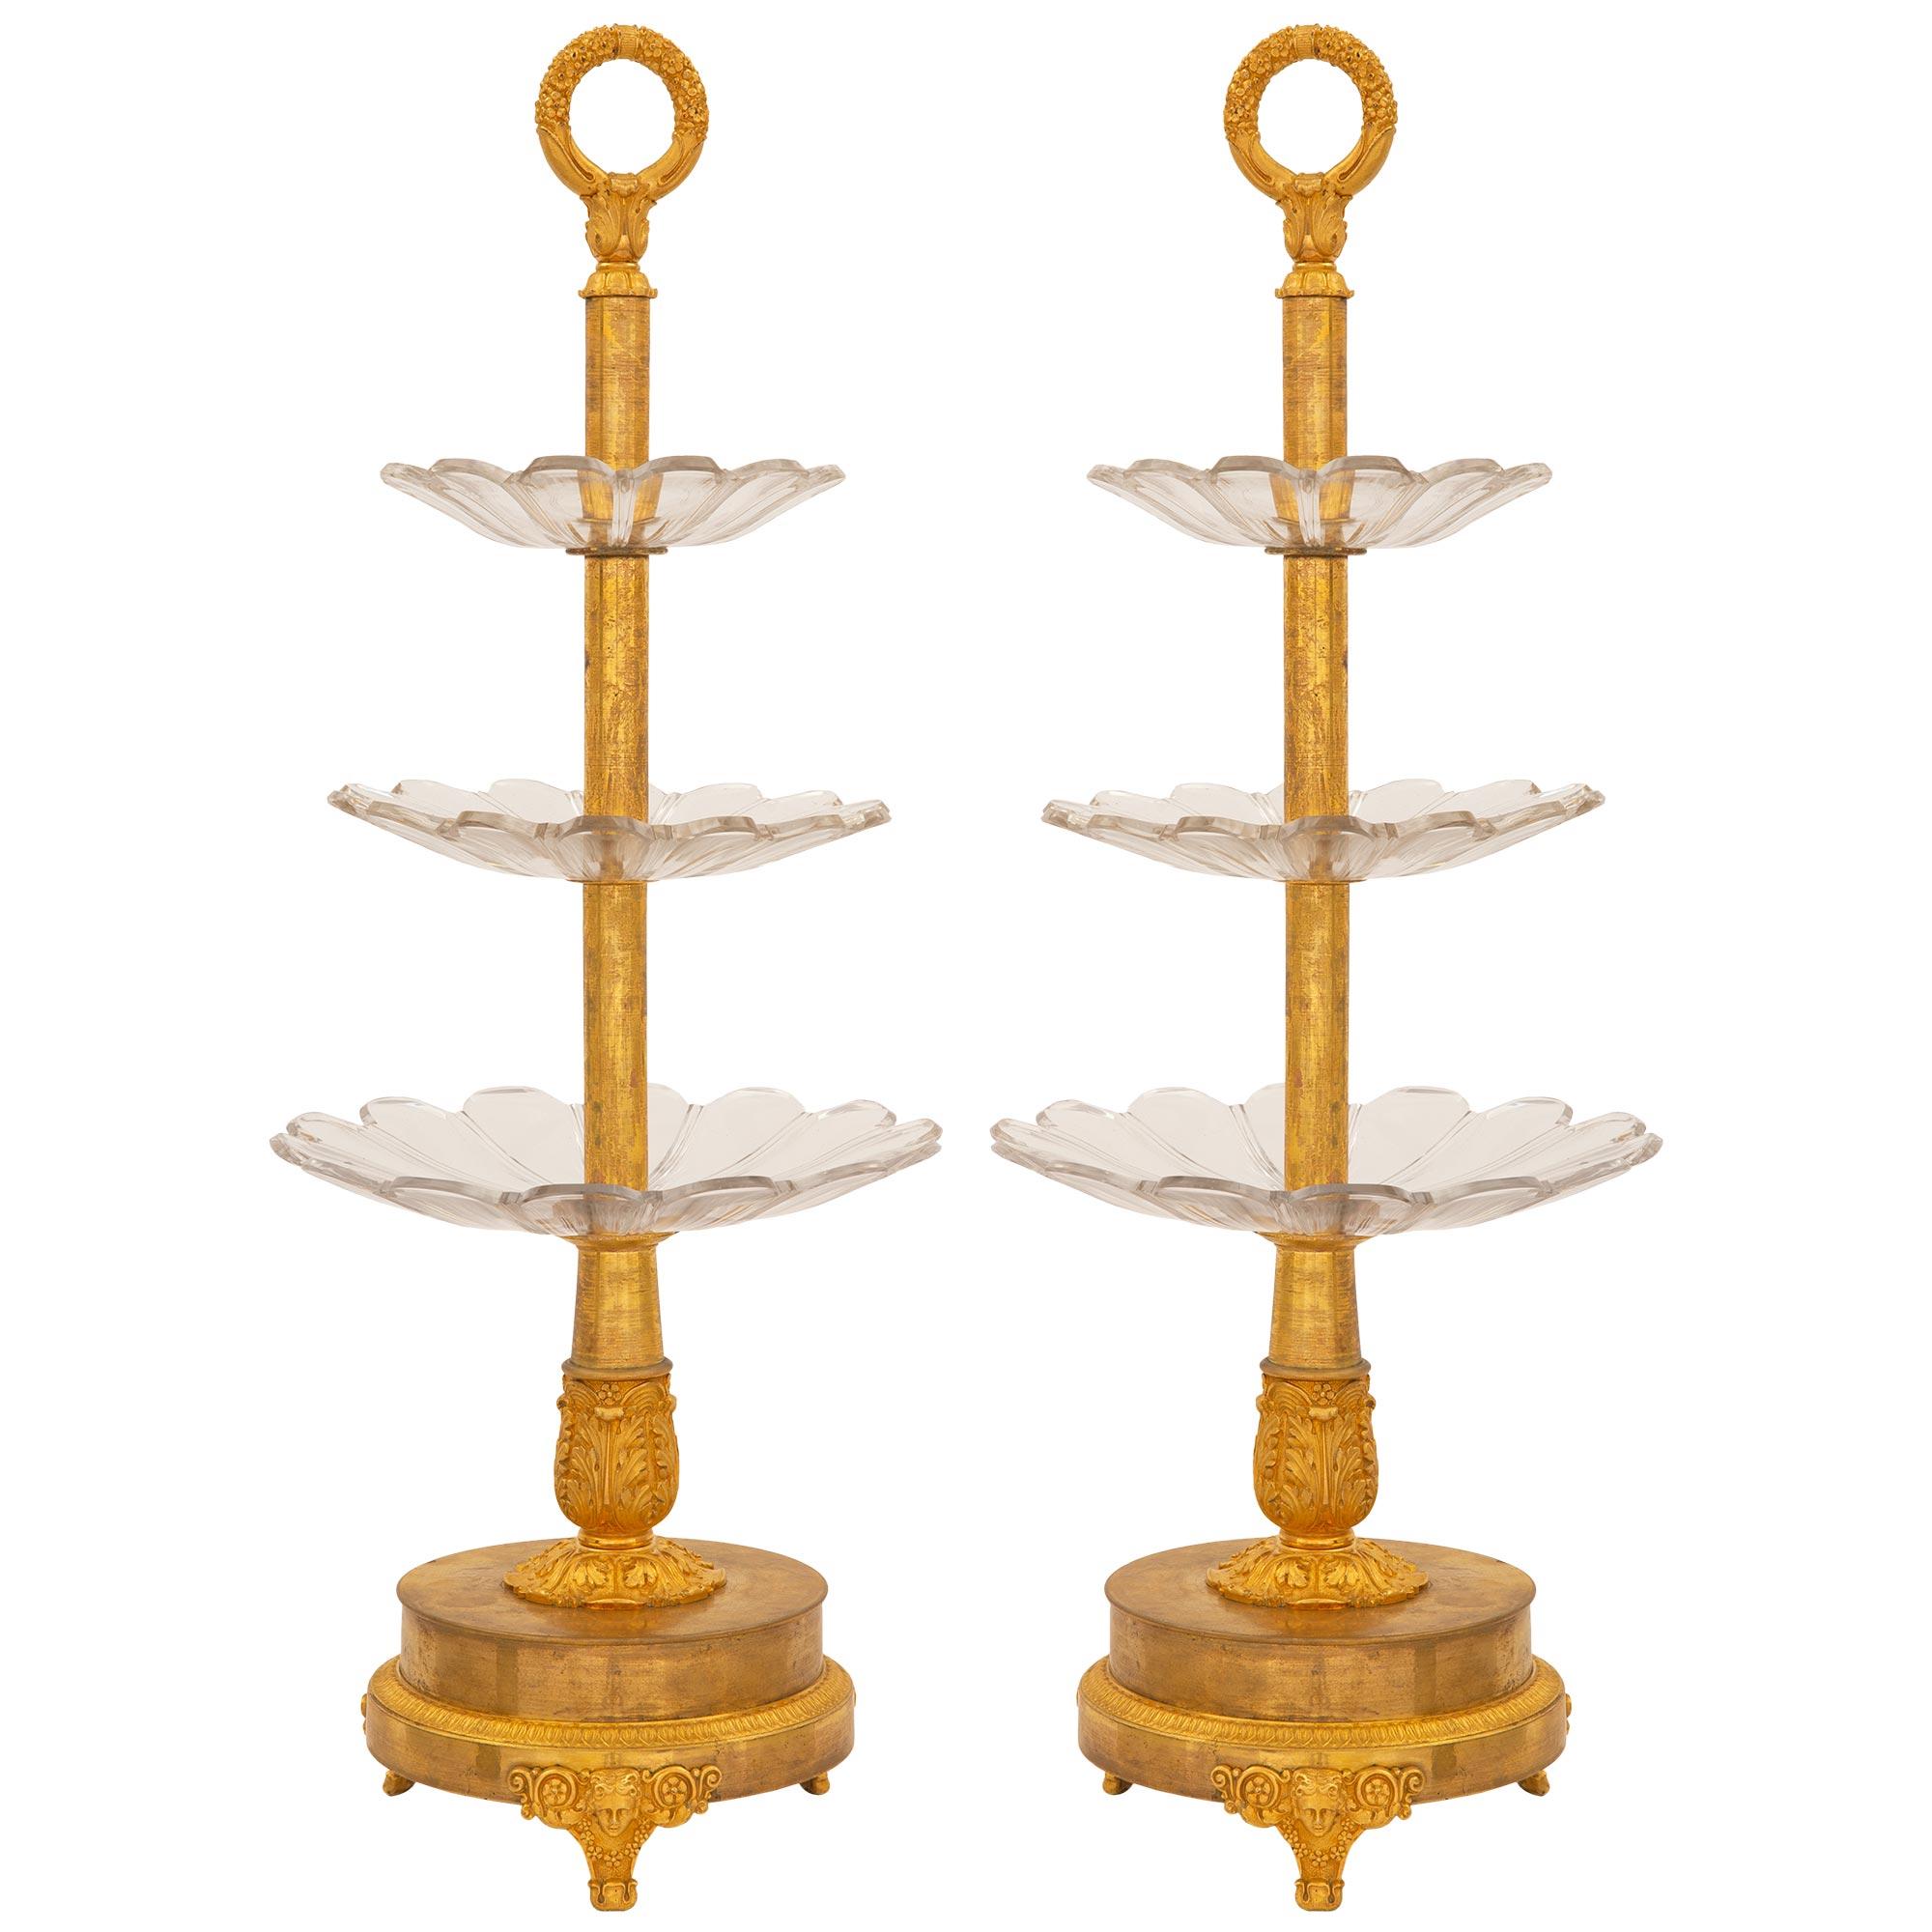 A magnificent pair of French early 19th century First Empire Neo-Classical st. Baccarat and ormolu three level Présentoirs. Each is raised on a circular ormolu base and has finely chased supports with a centered maidens face amidst floral garlands